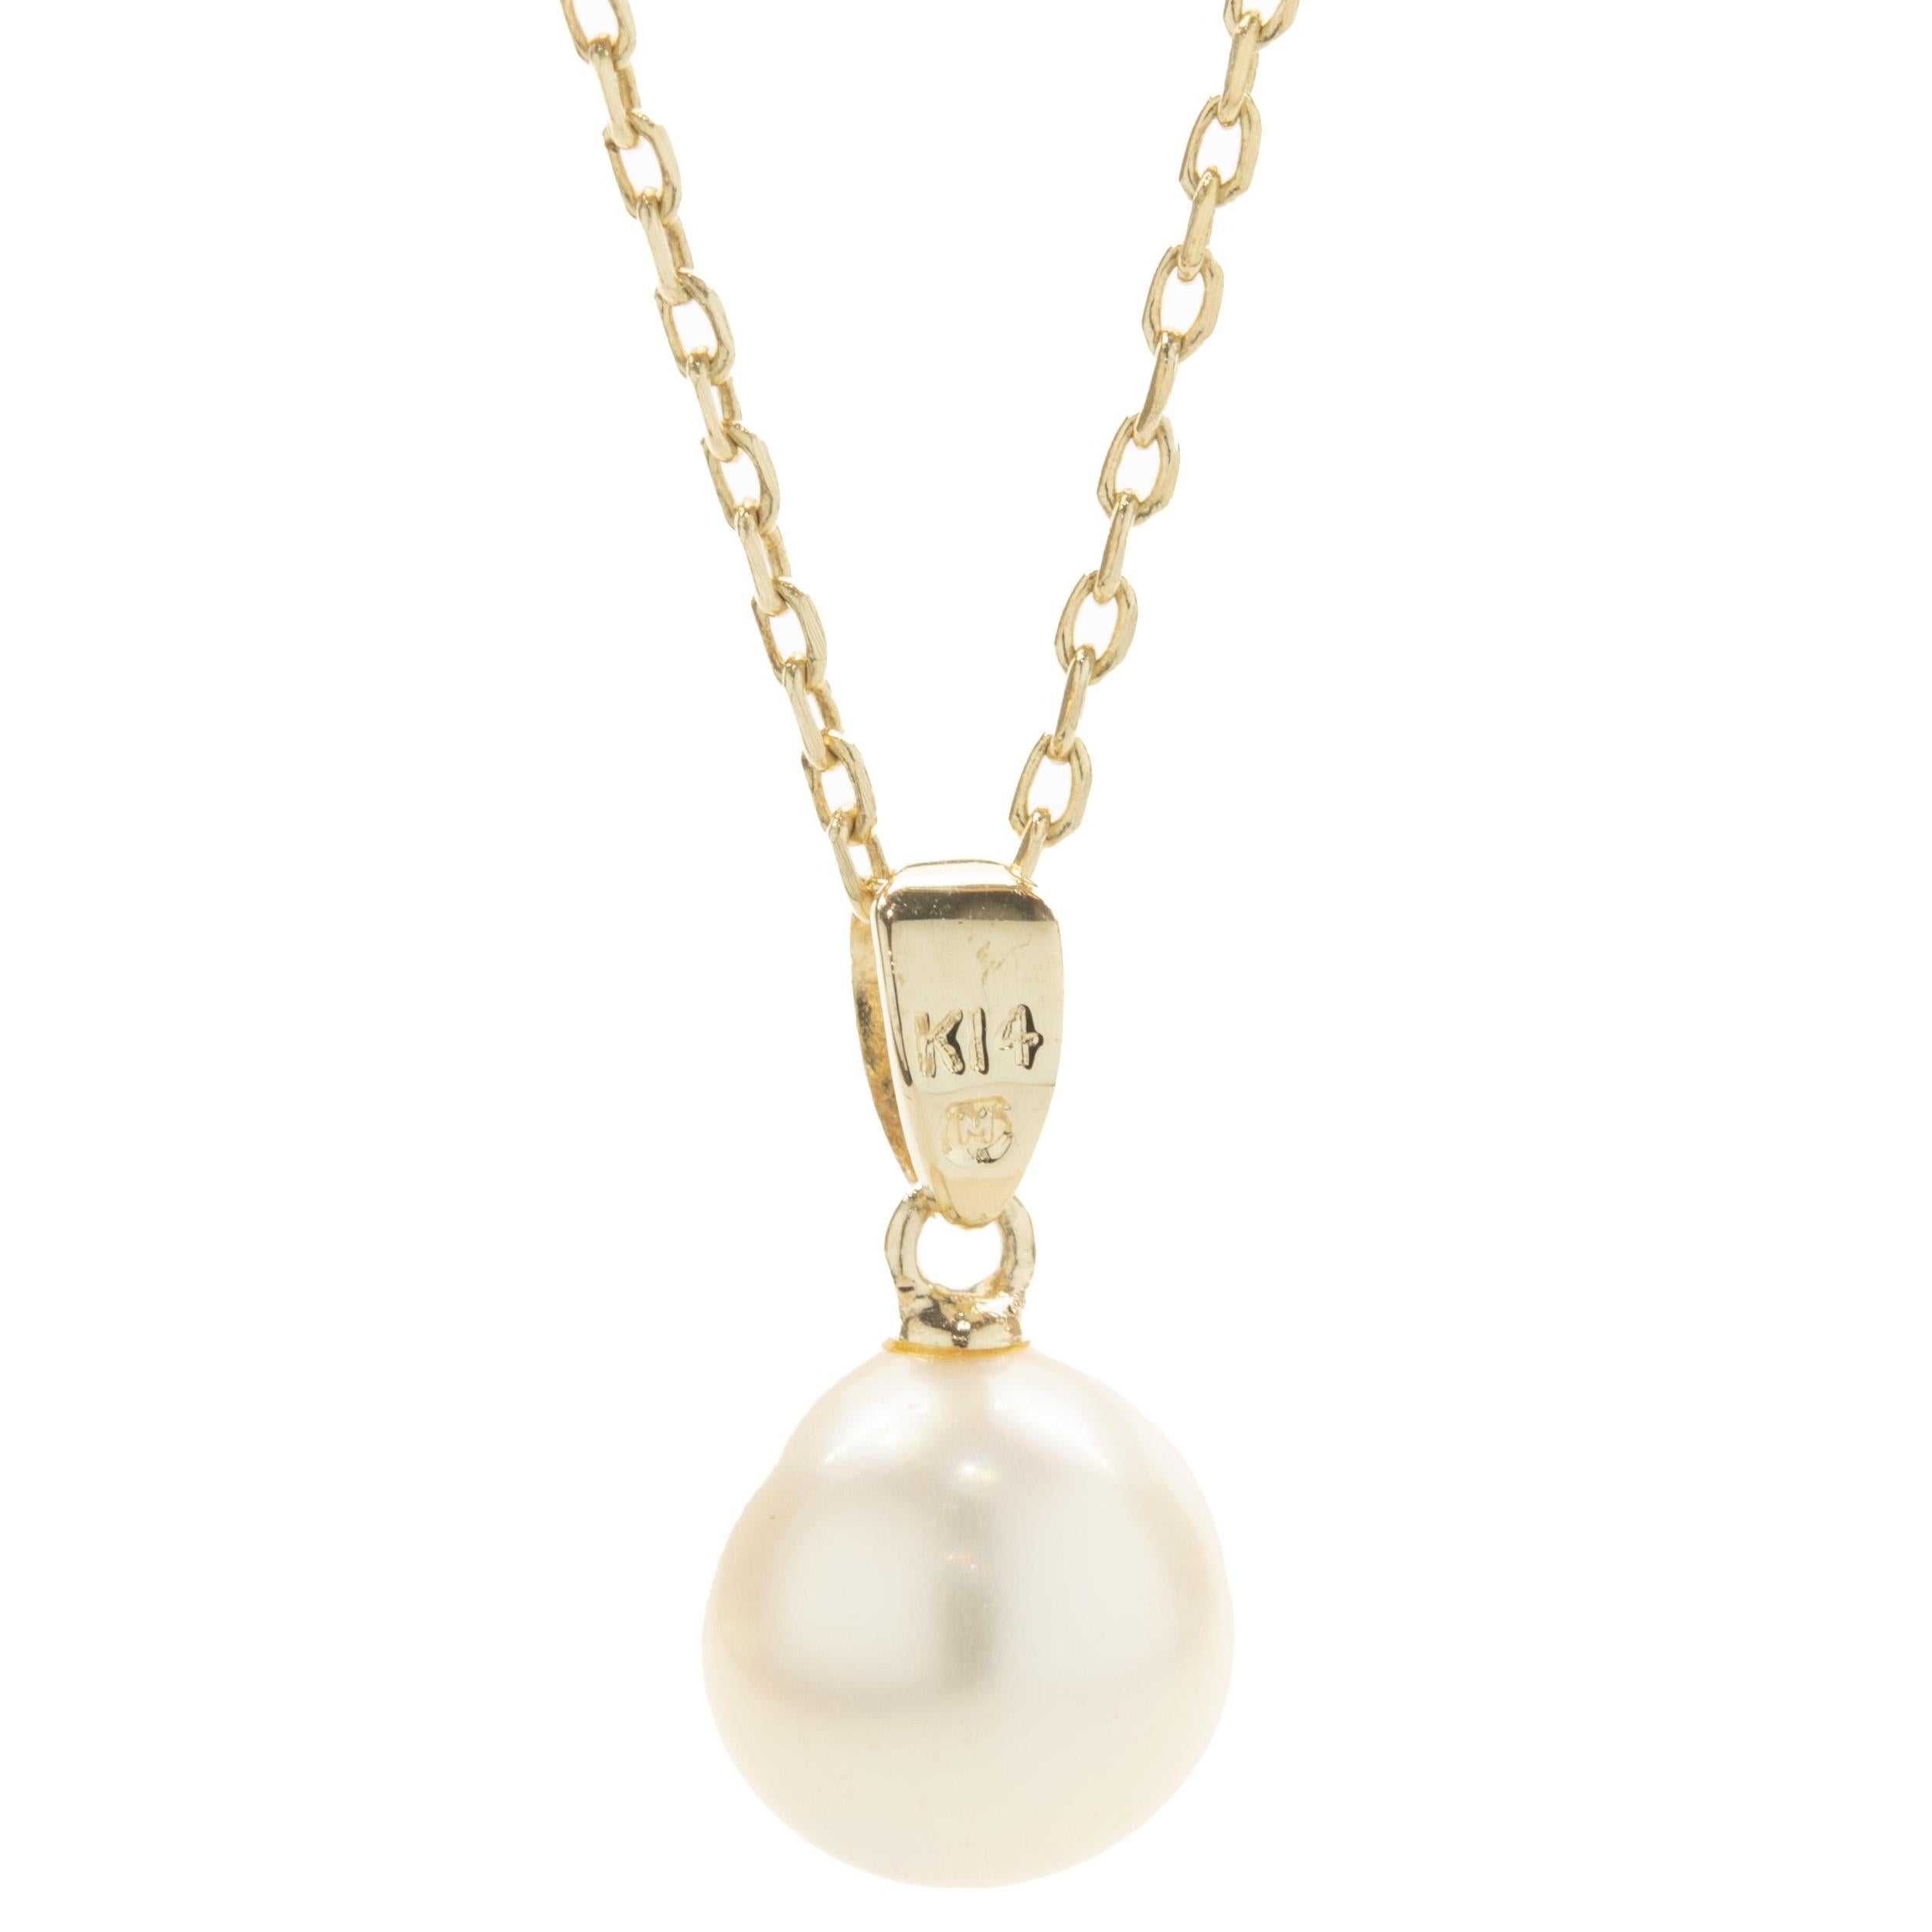 Designer: Mikimoto
Material: 14K yellow gold / pearl
Dimensions: necklace measures 18-inches in length 
Weight: 2.60 grams